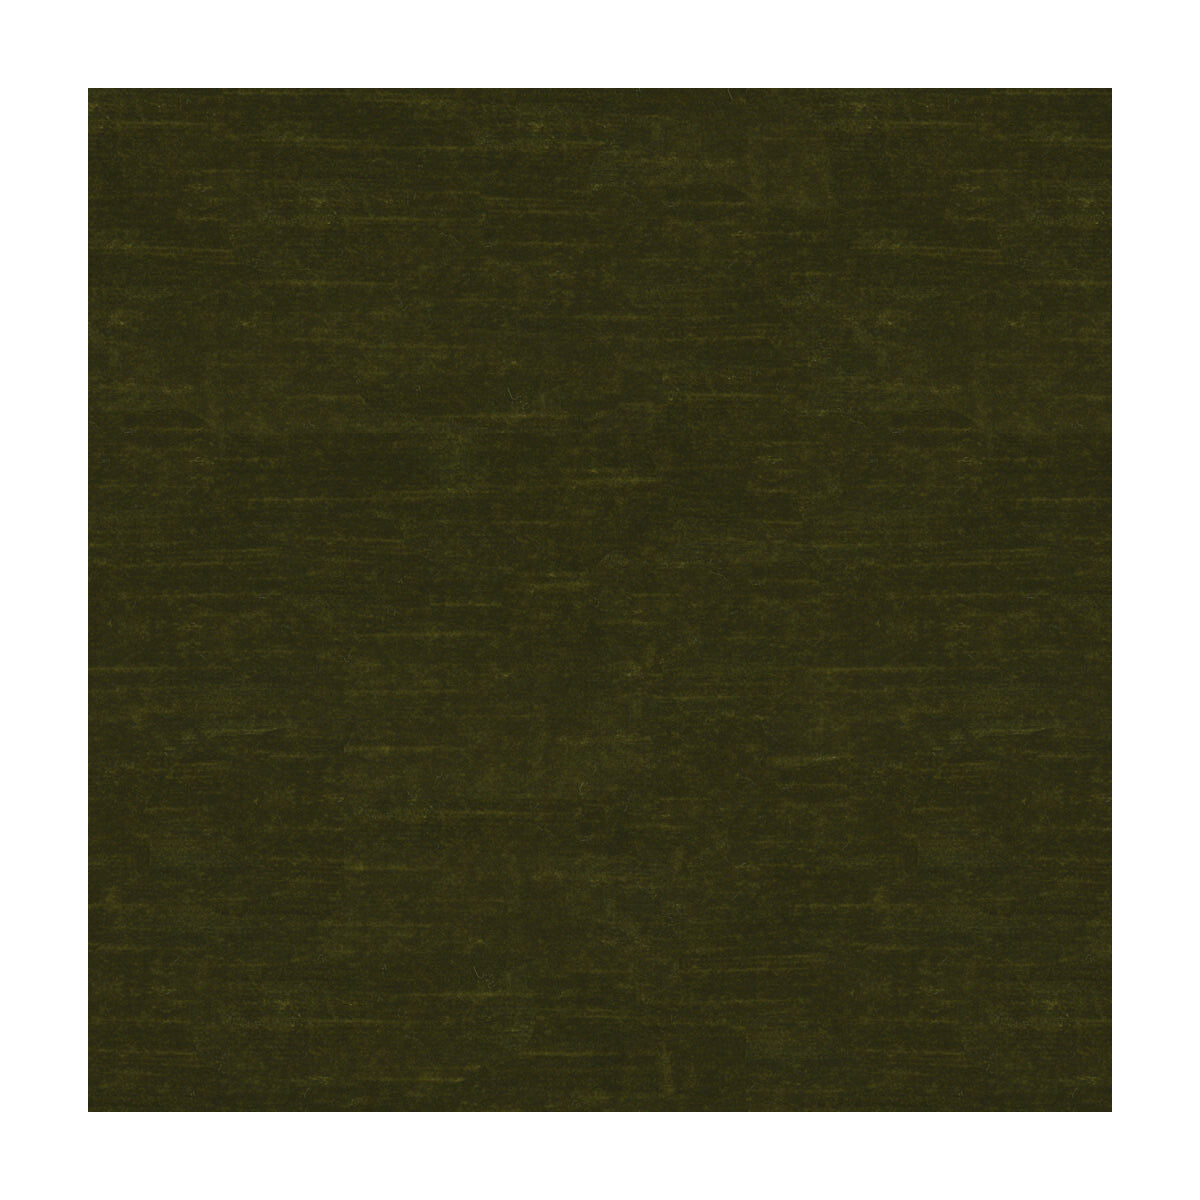 High Impact fabric in olive color - pattern 34329.303.0 - by Kravet Couture